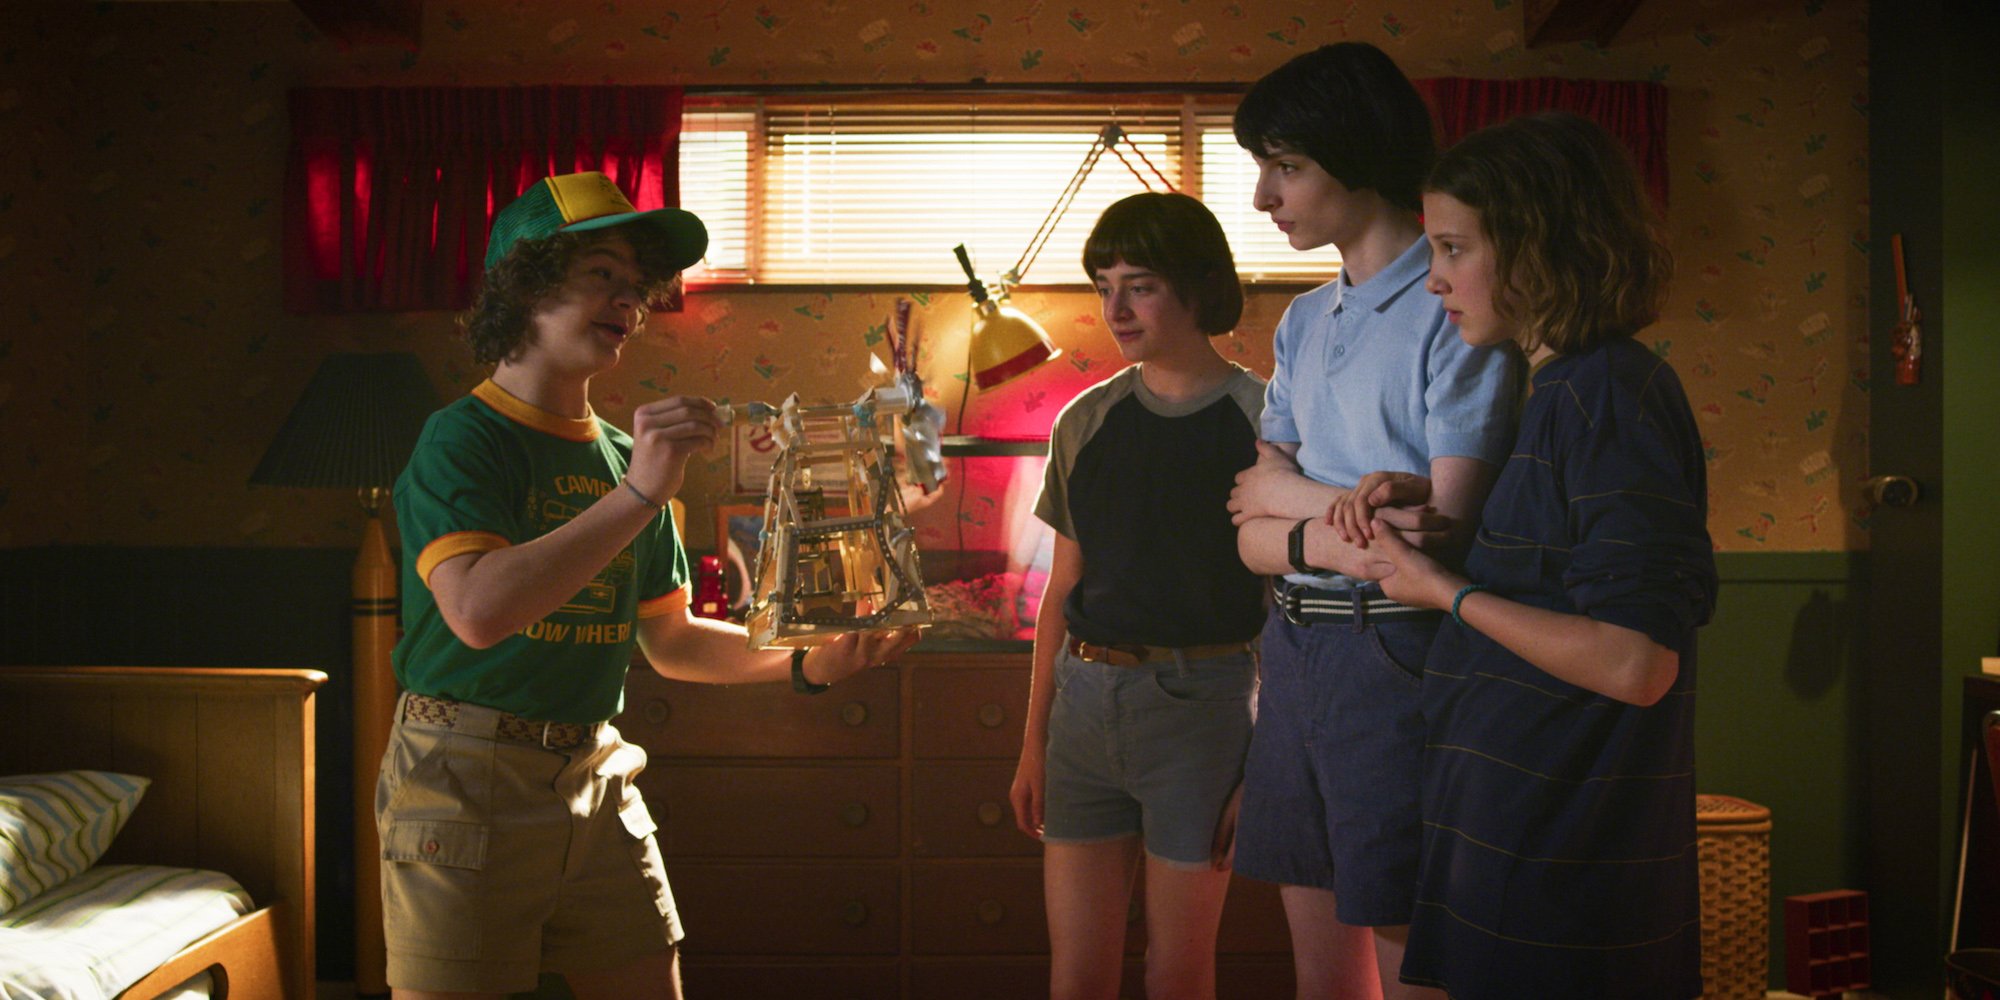 Dustin holding out a toy to Will, Mike, and Eleven in a production still from 'Stranger Things' Season 3